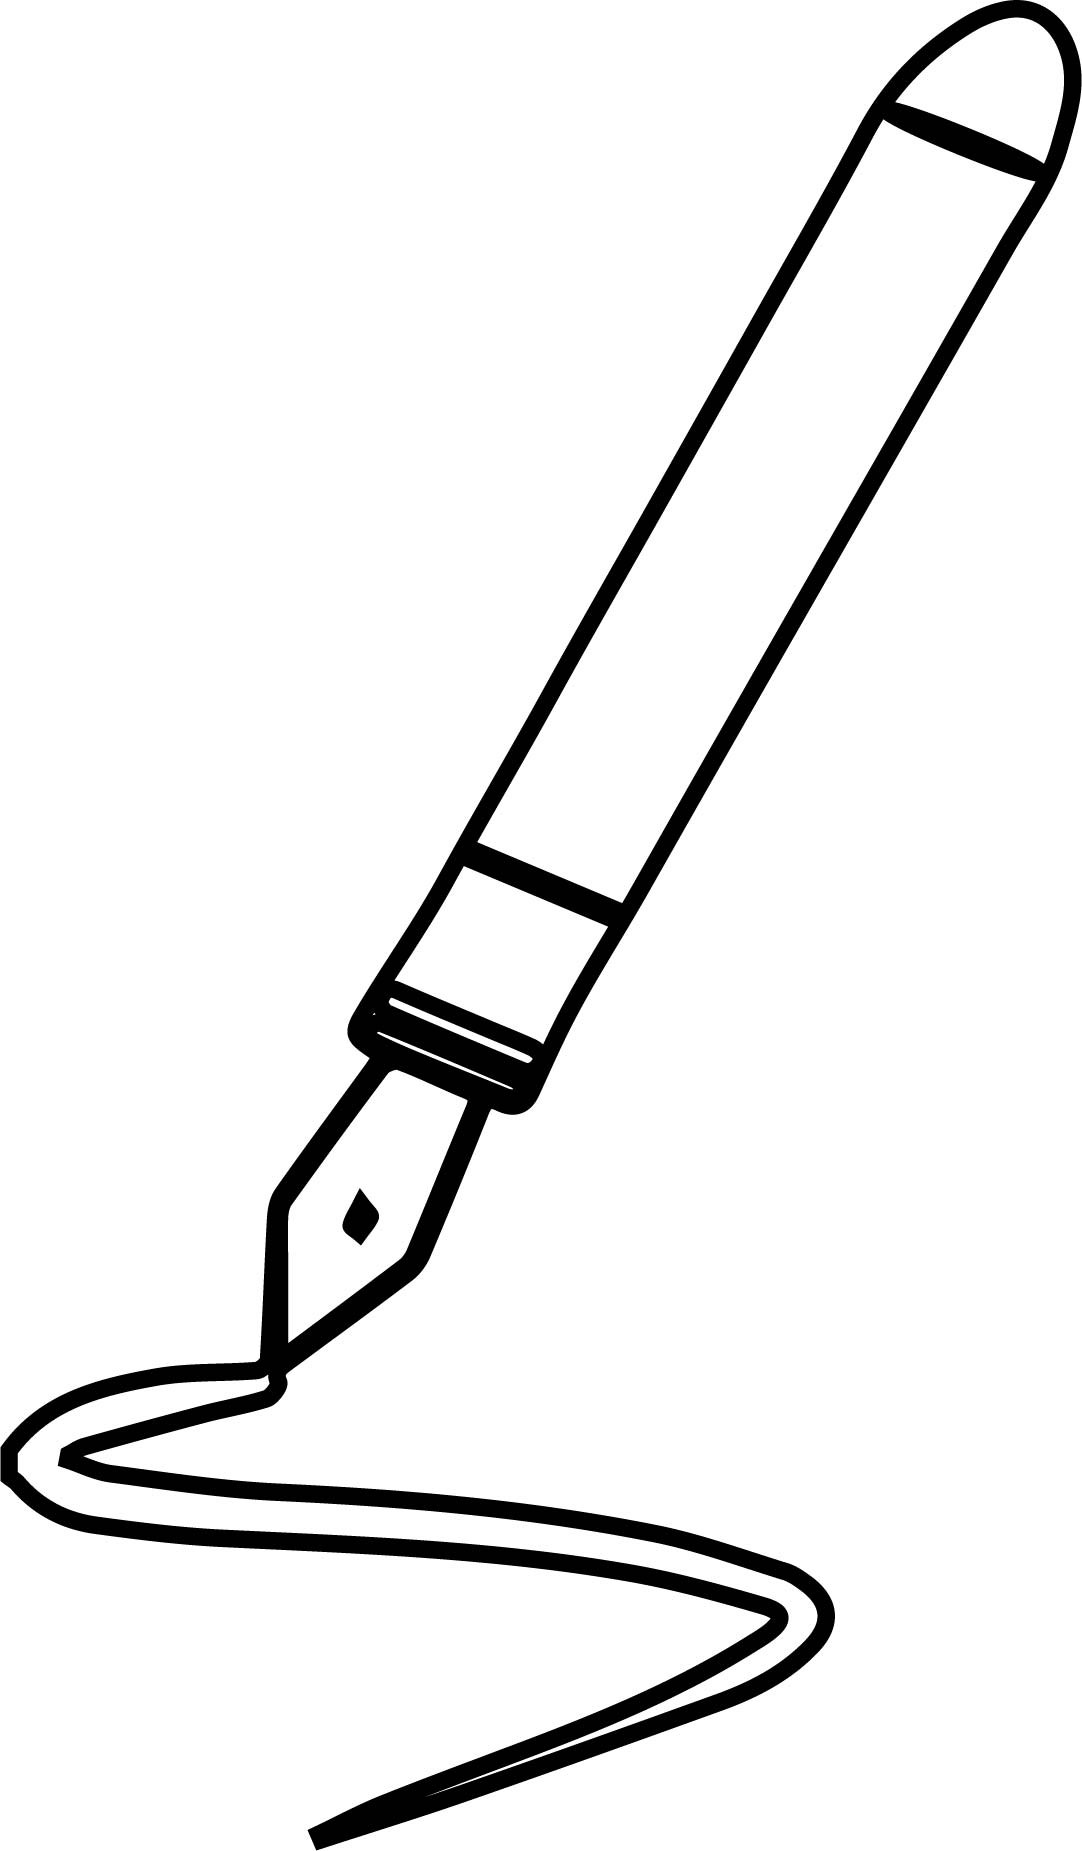 Coloring Book Pens
 Just Calligraphy Pen Coloring Page